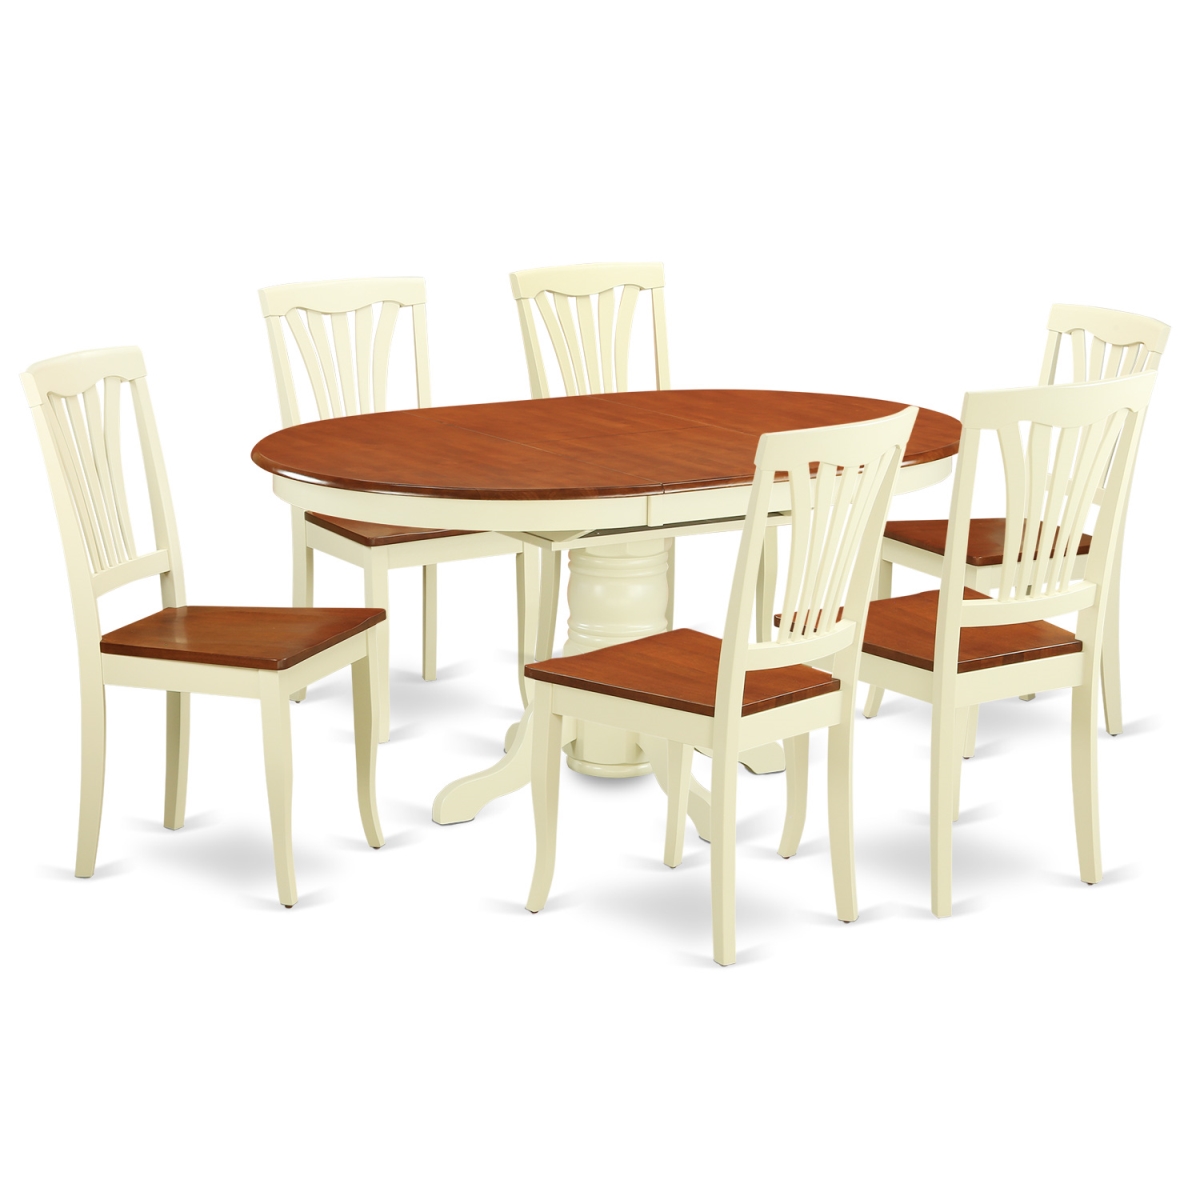 Picture of East West Furniture AVON7-WHI-W Dinette Table with Leaf & 6 Wood Seat Chairs, Buttermilk & Cherry - 7 Piece